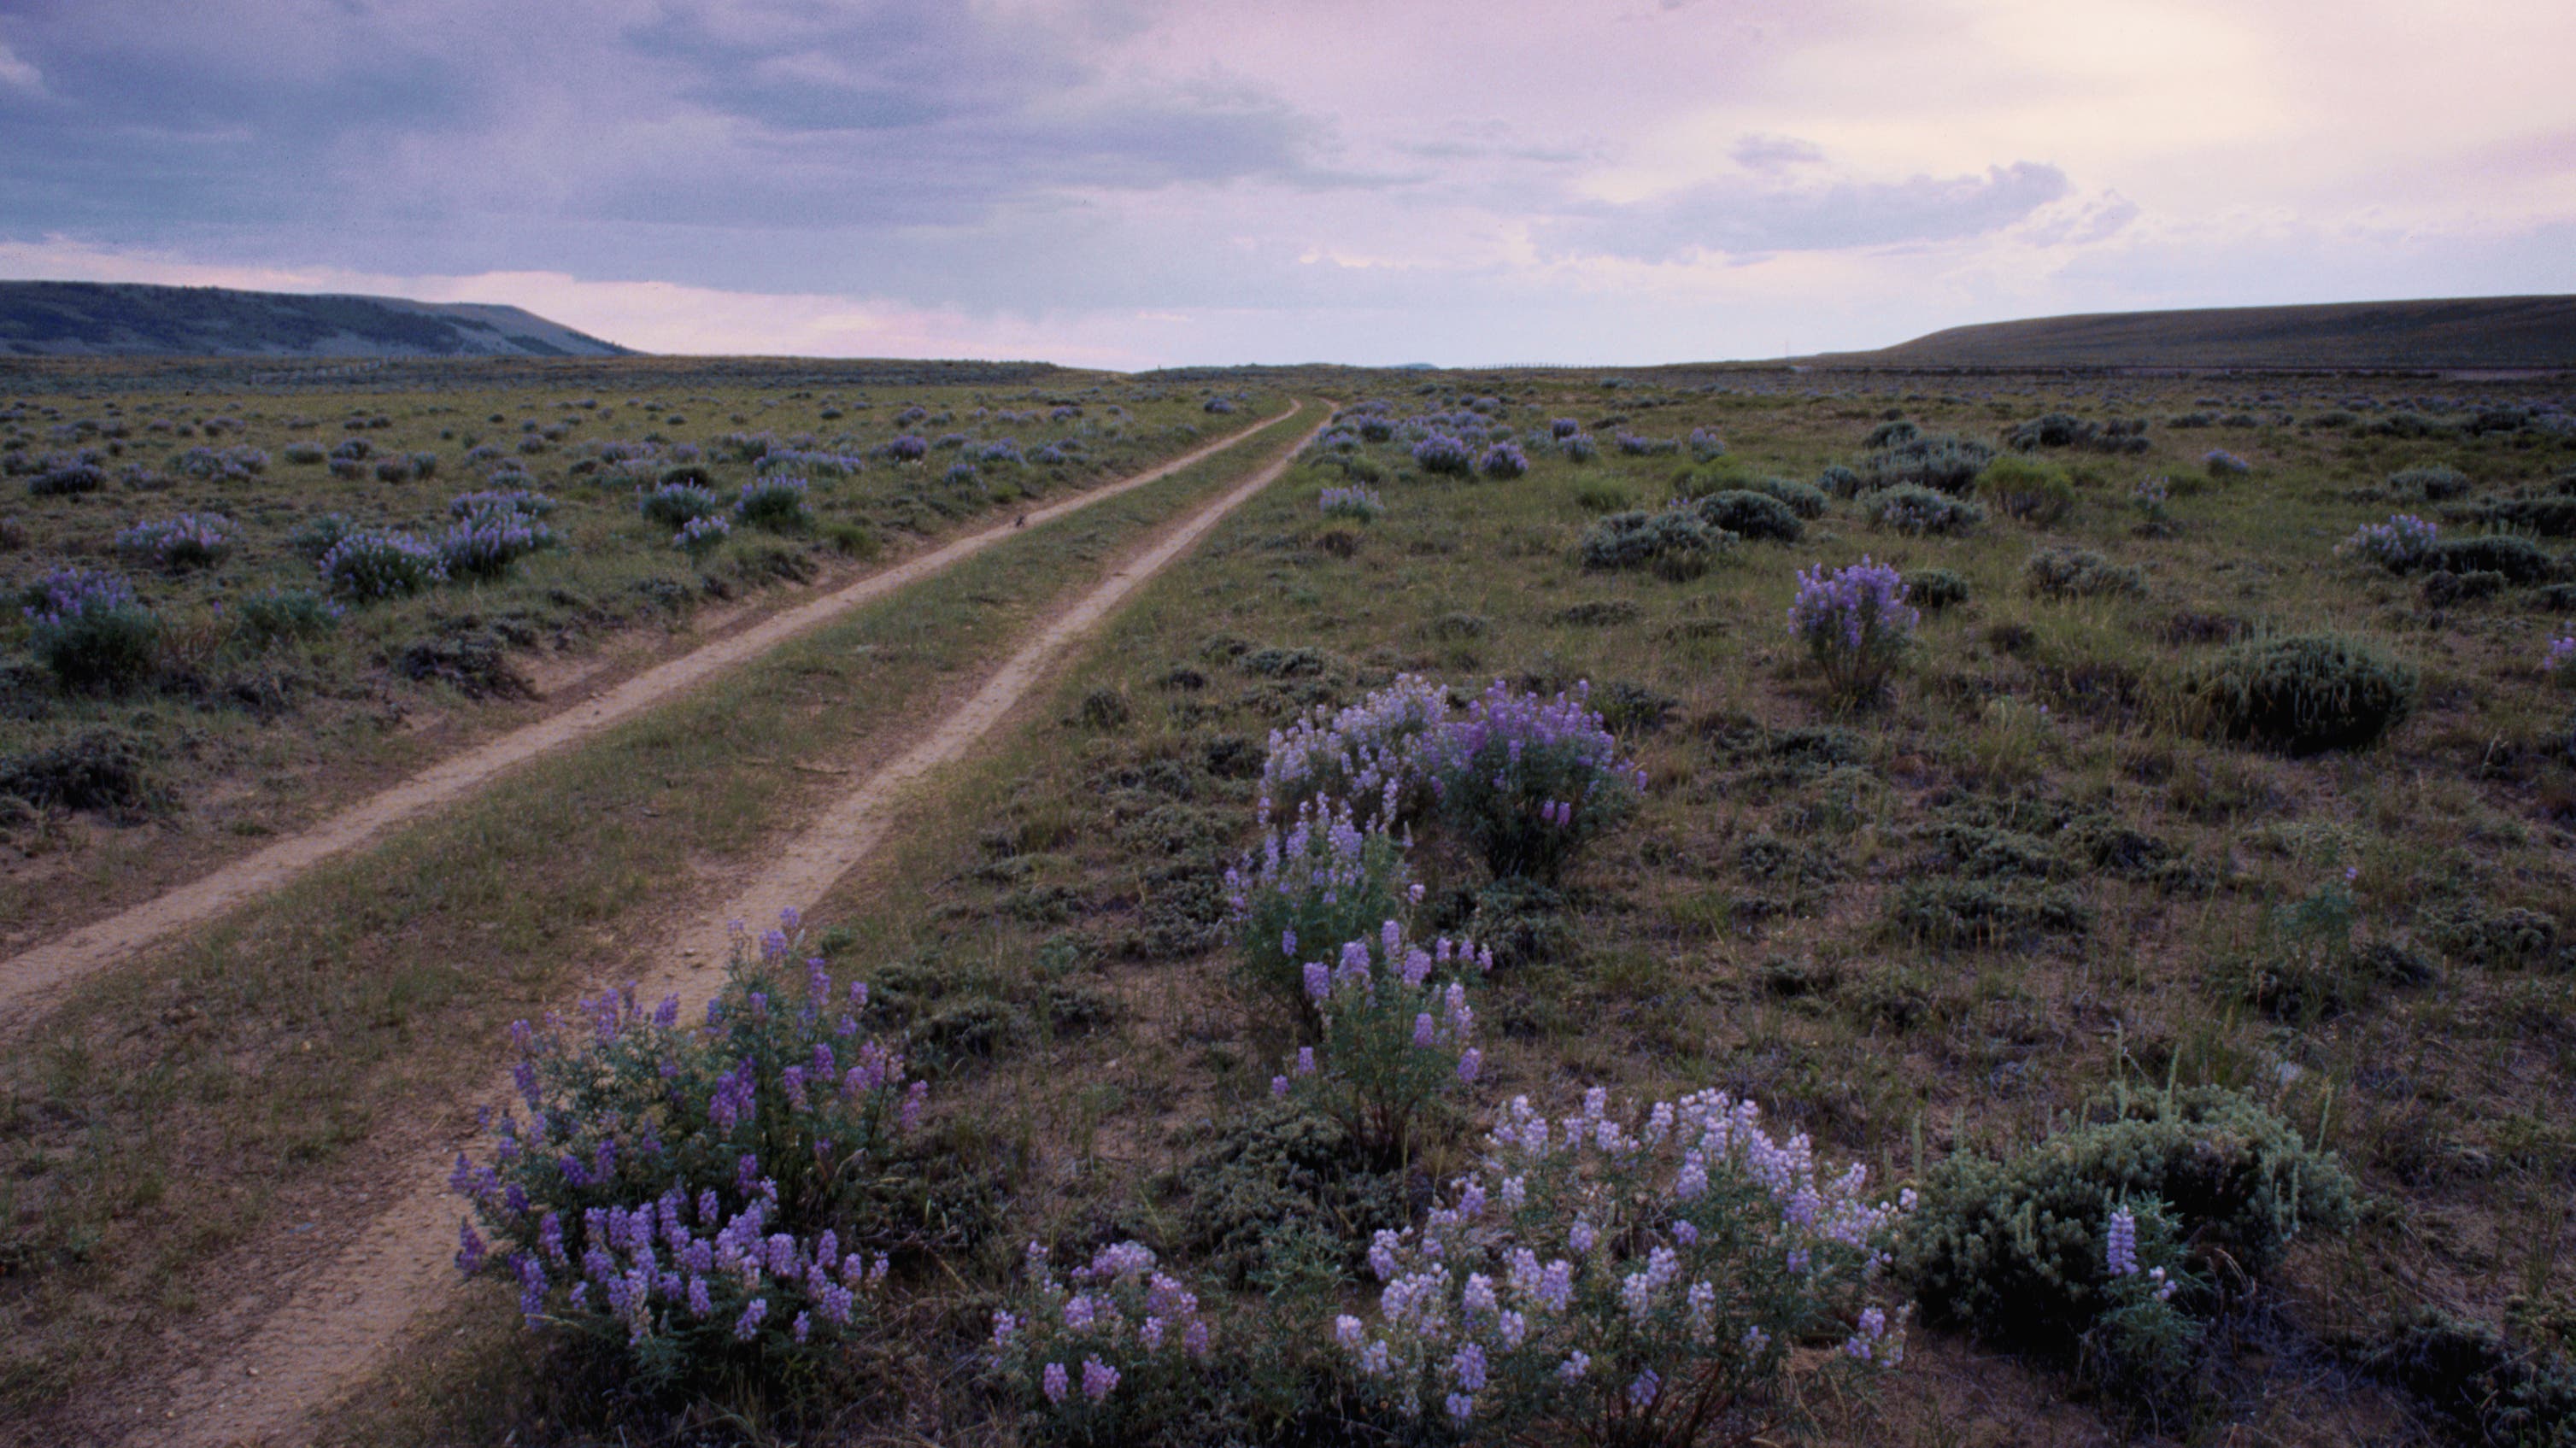 Lupine grows next to wagon wheel ruts made by wagon trains crossing the South Pass on the Oregon Trail. South Pass is the highest point in elevation on the trail.